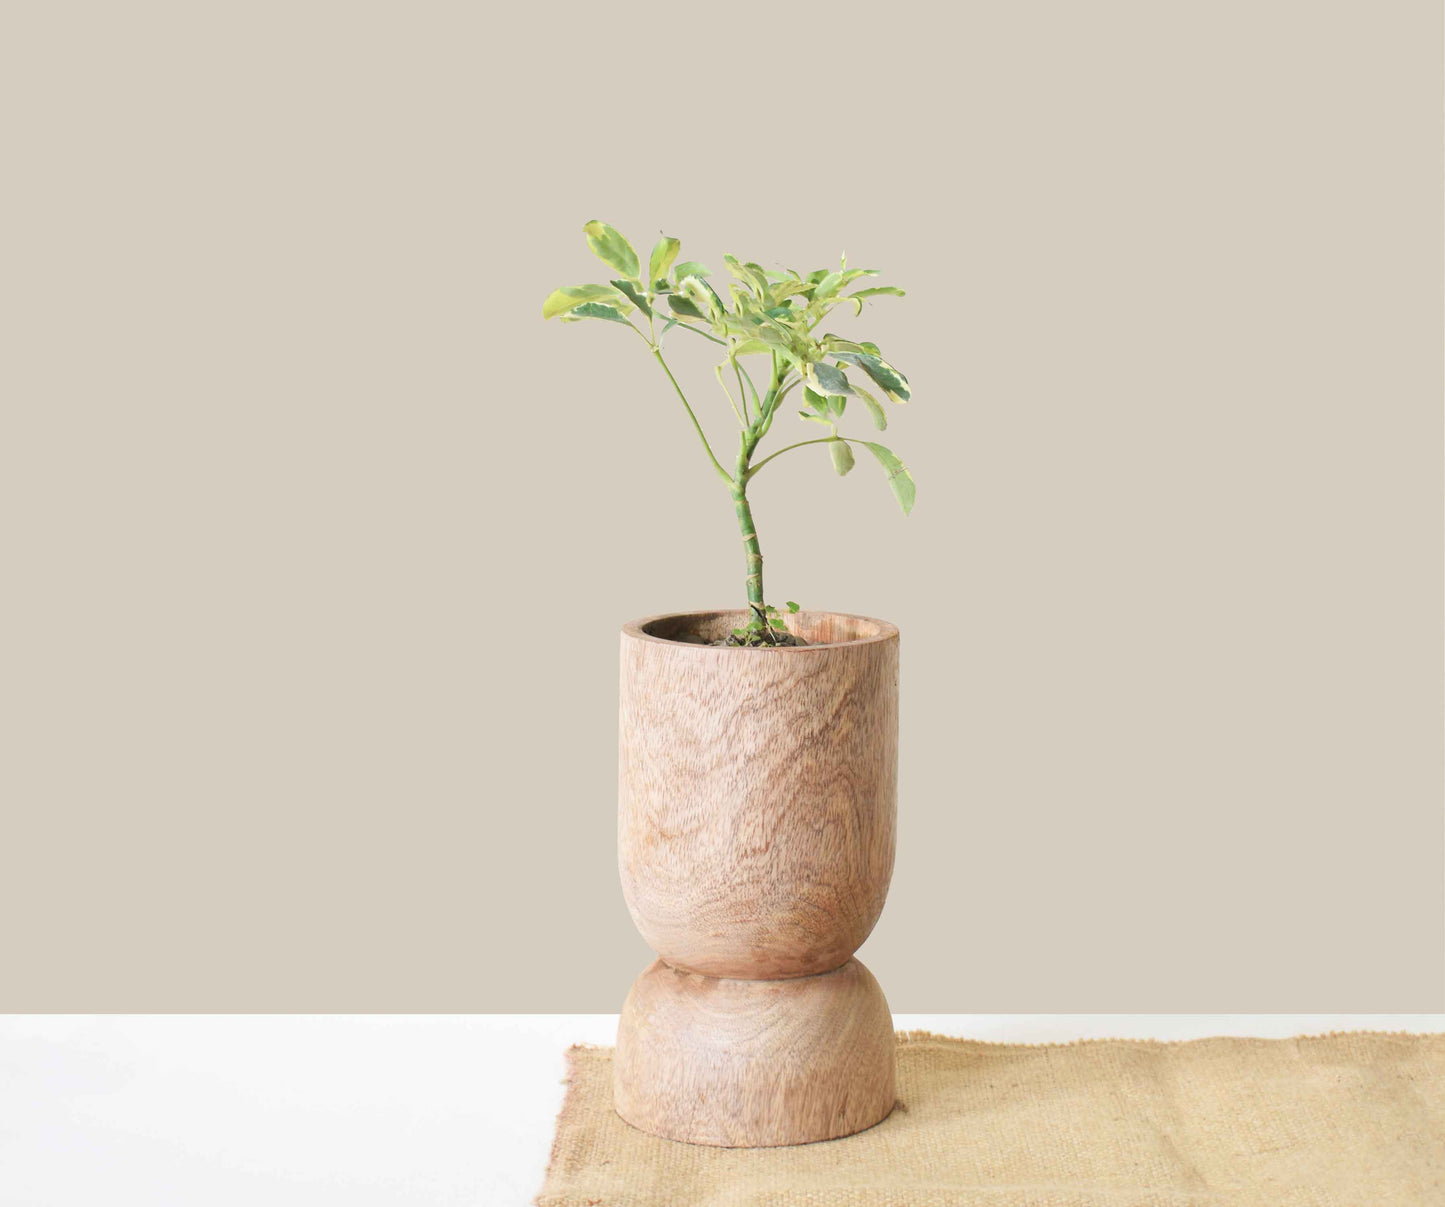 interior decor with wooden pot for plants